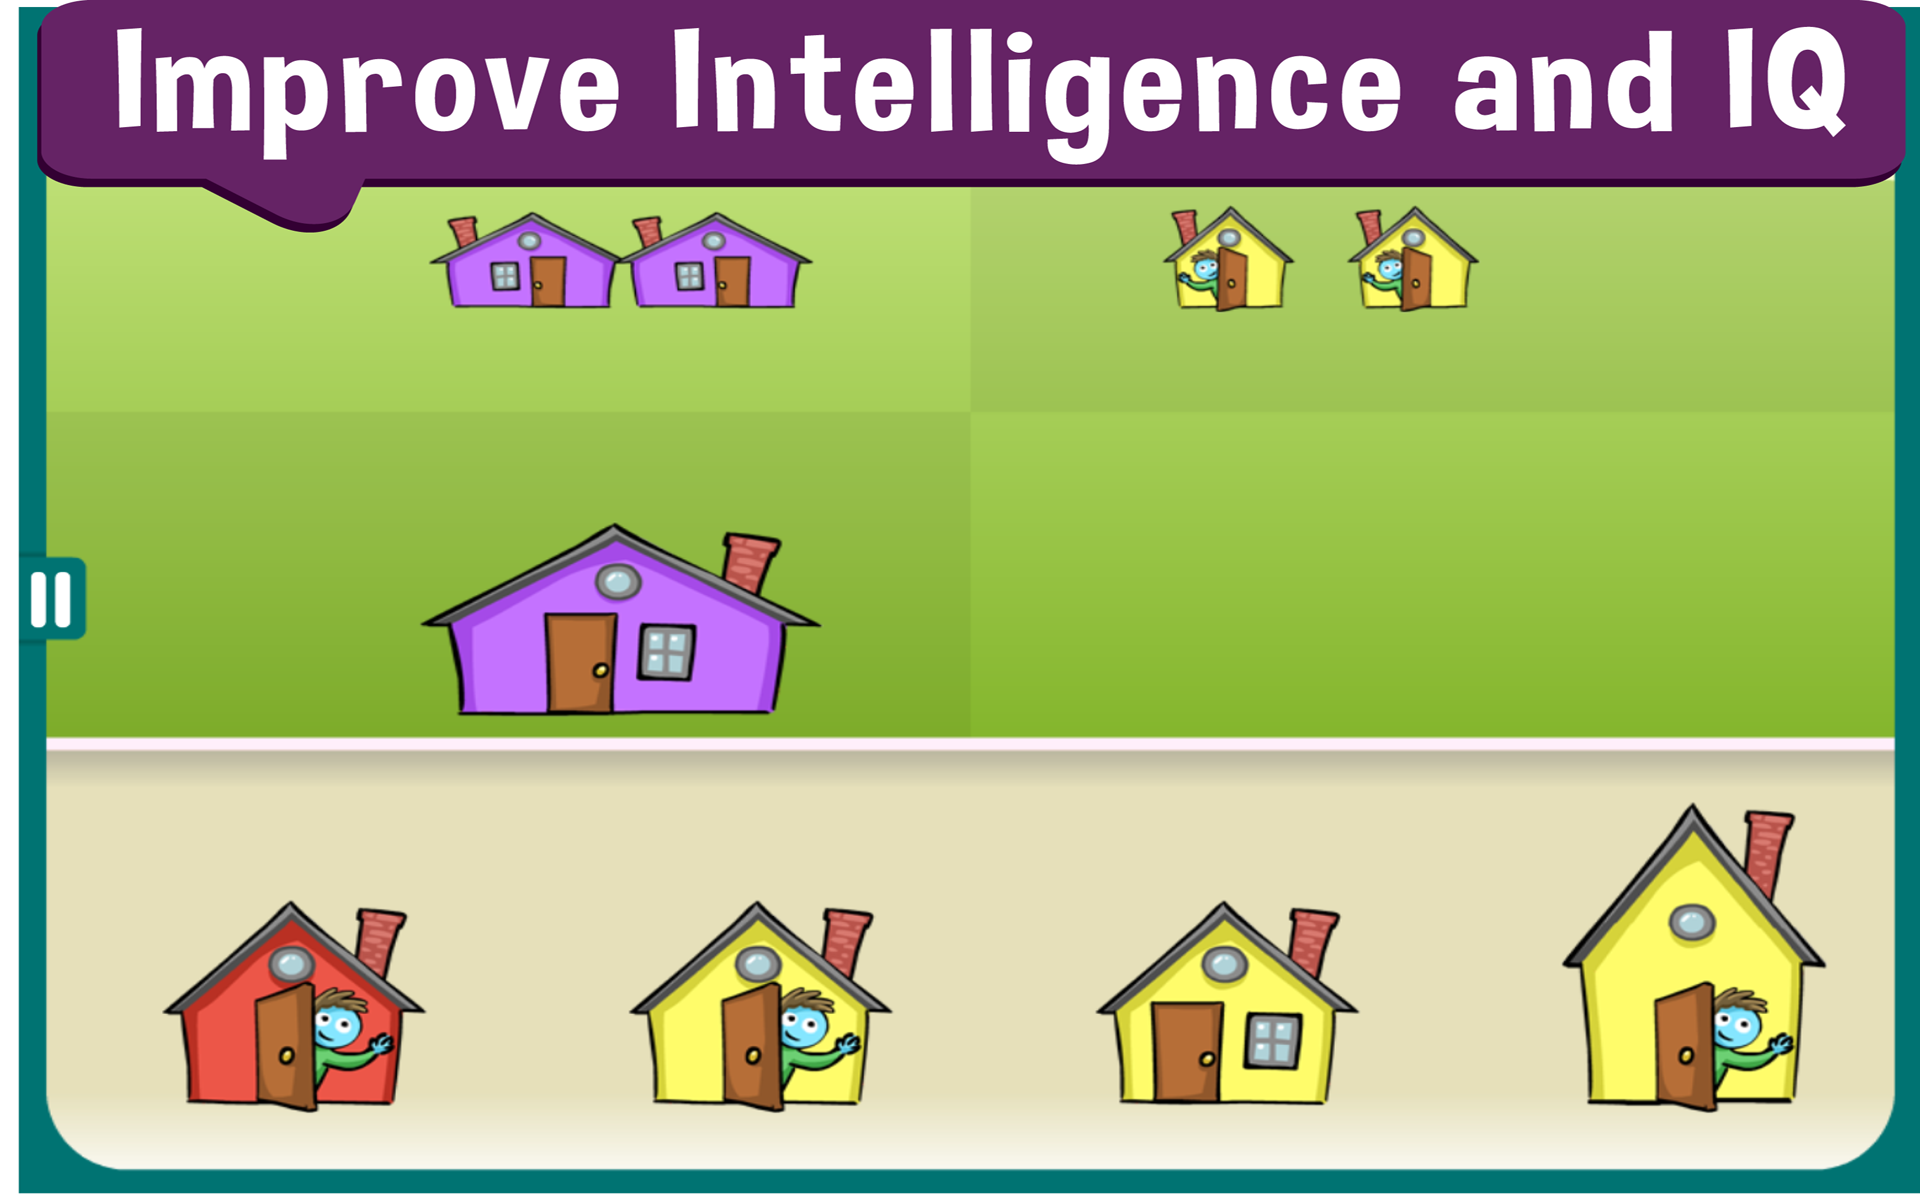 Math & Logic - #1 Adaptive Brain Training for Children, Toddlers and Preschoolers 2 to 8 Years of Age: Education Games, Art Activities and Learning Puzzles